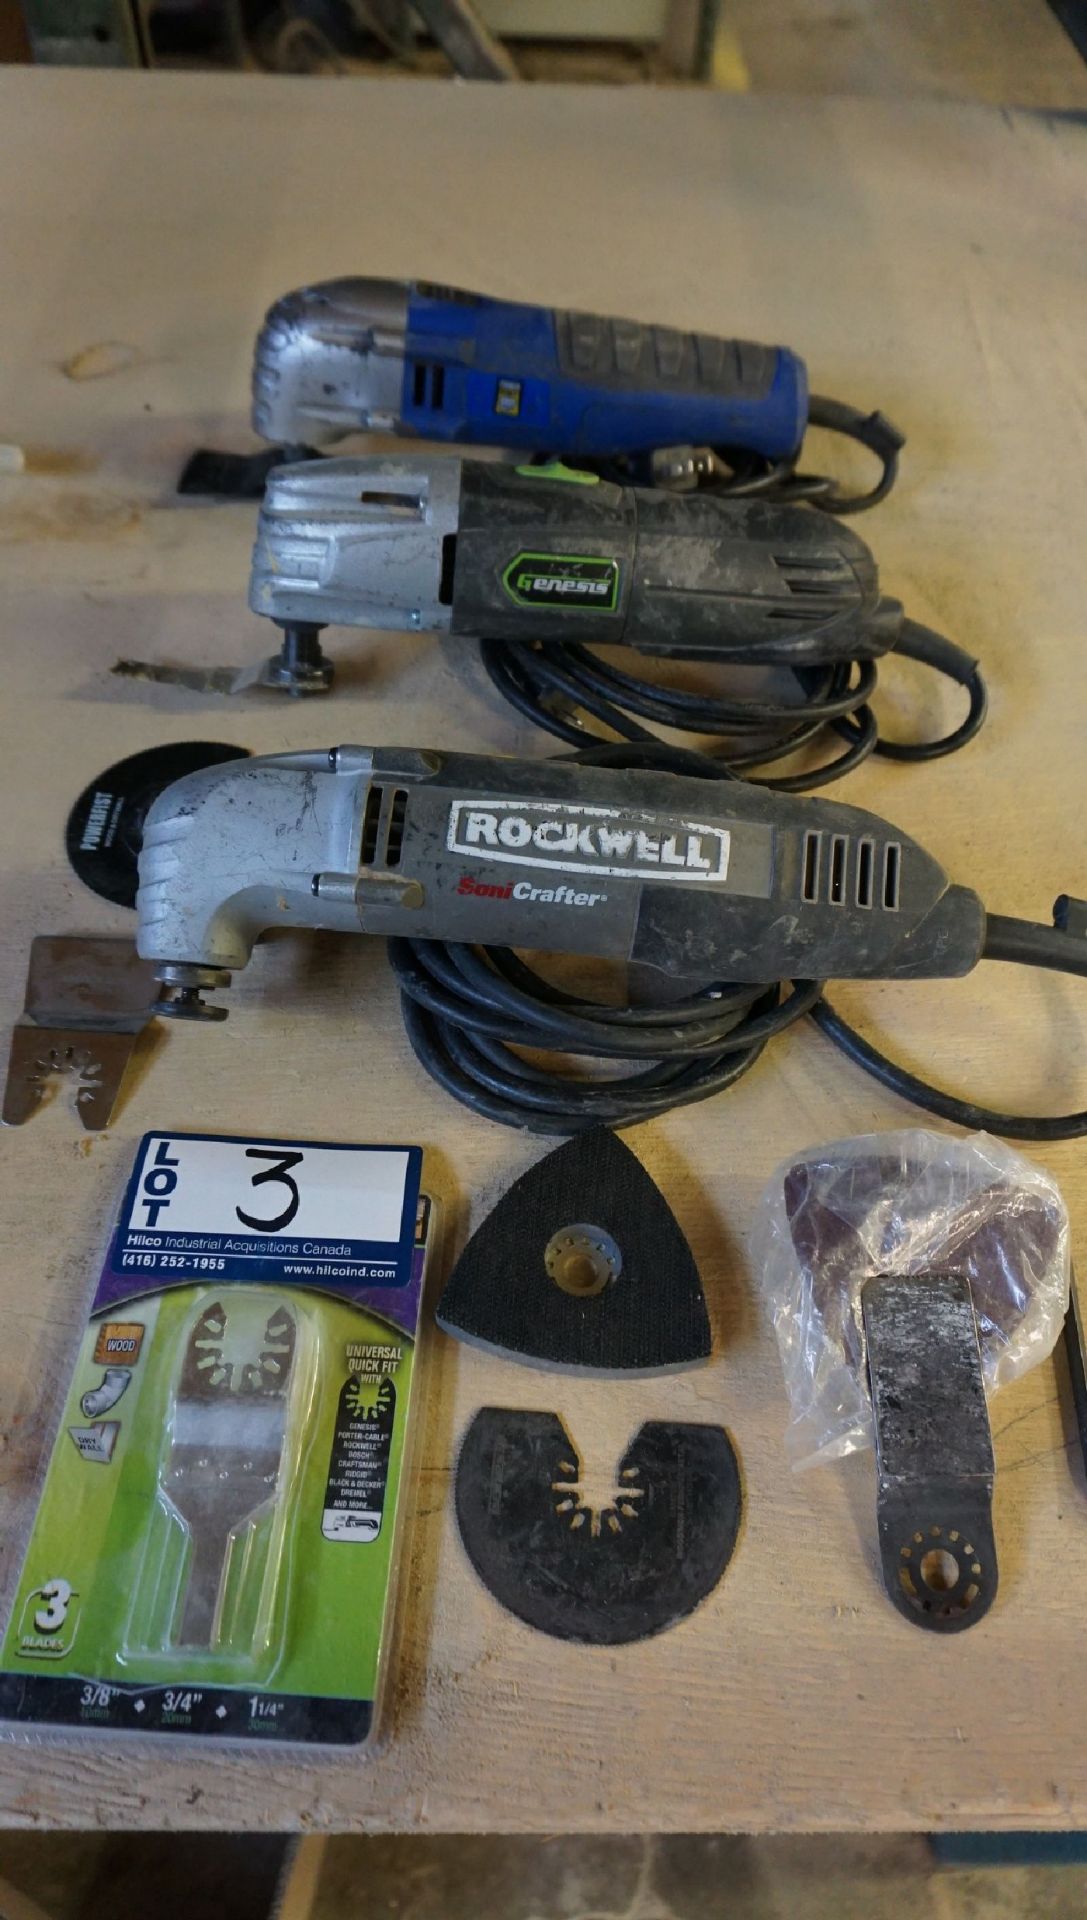 Rockwell SoniCrafter, Genesis Oscillating Tooling